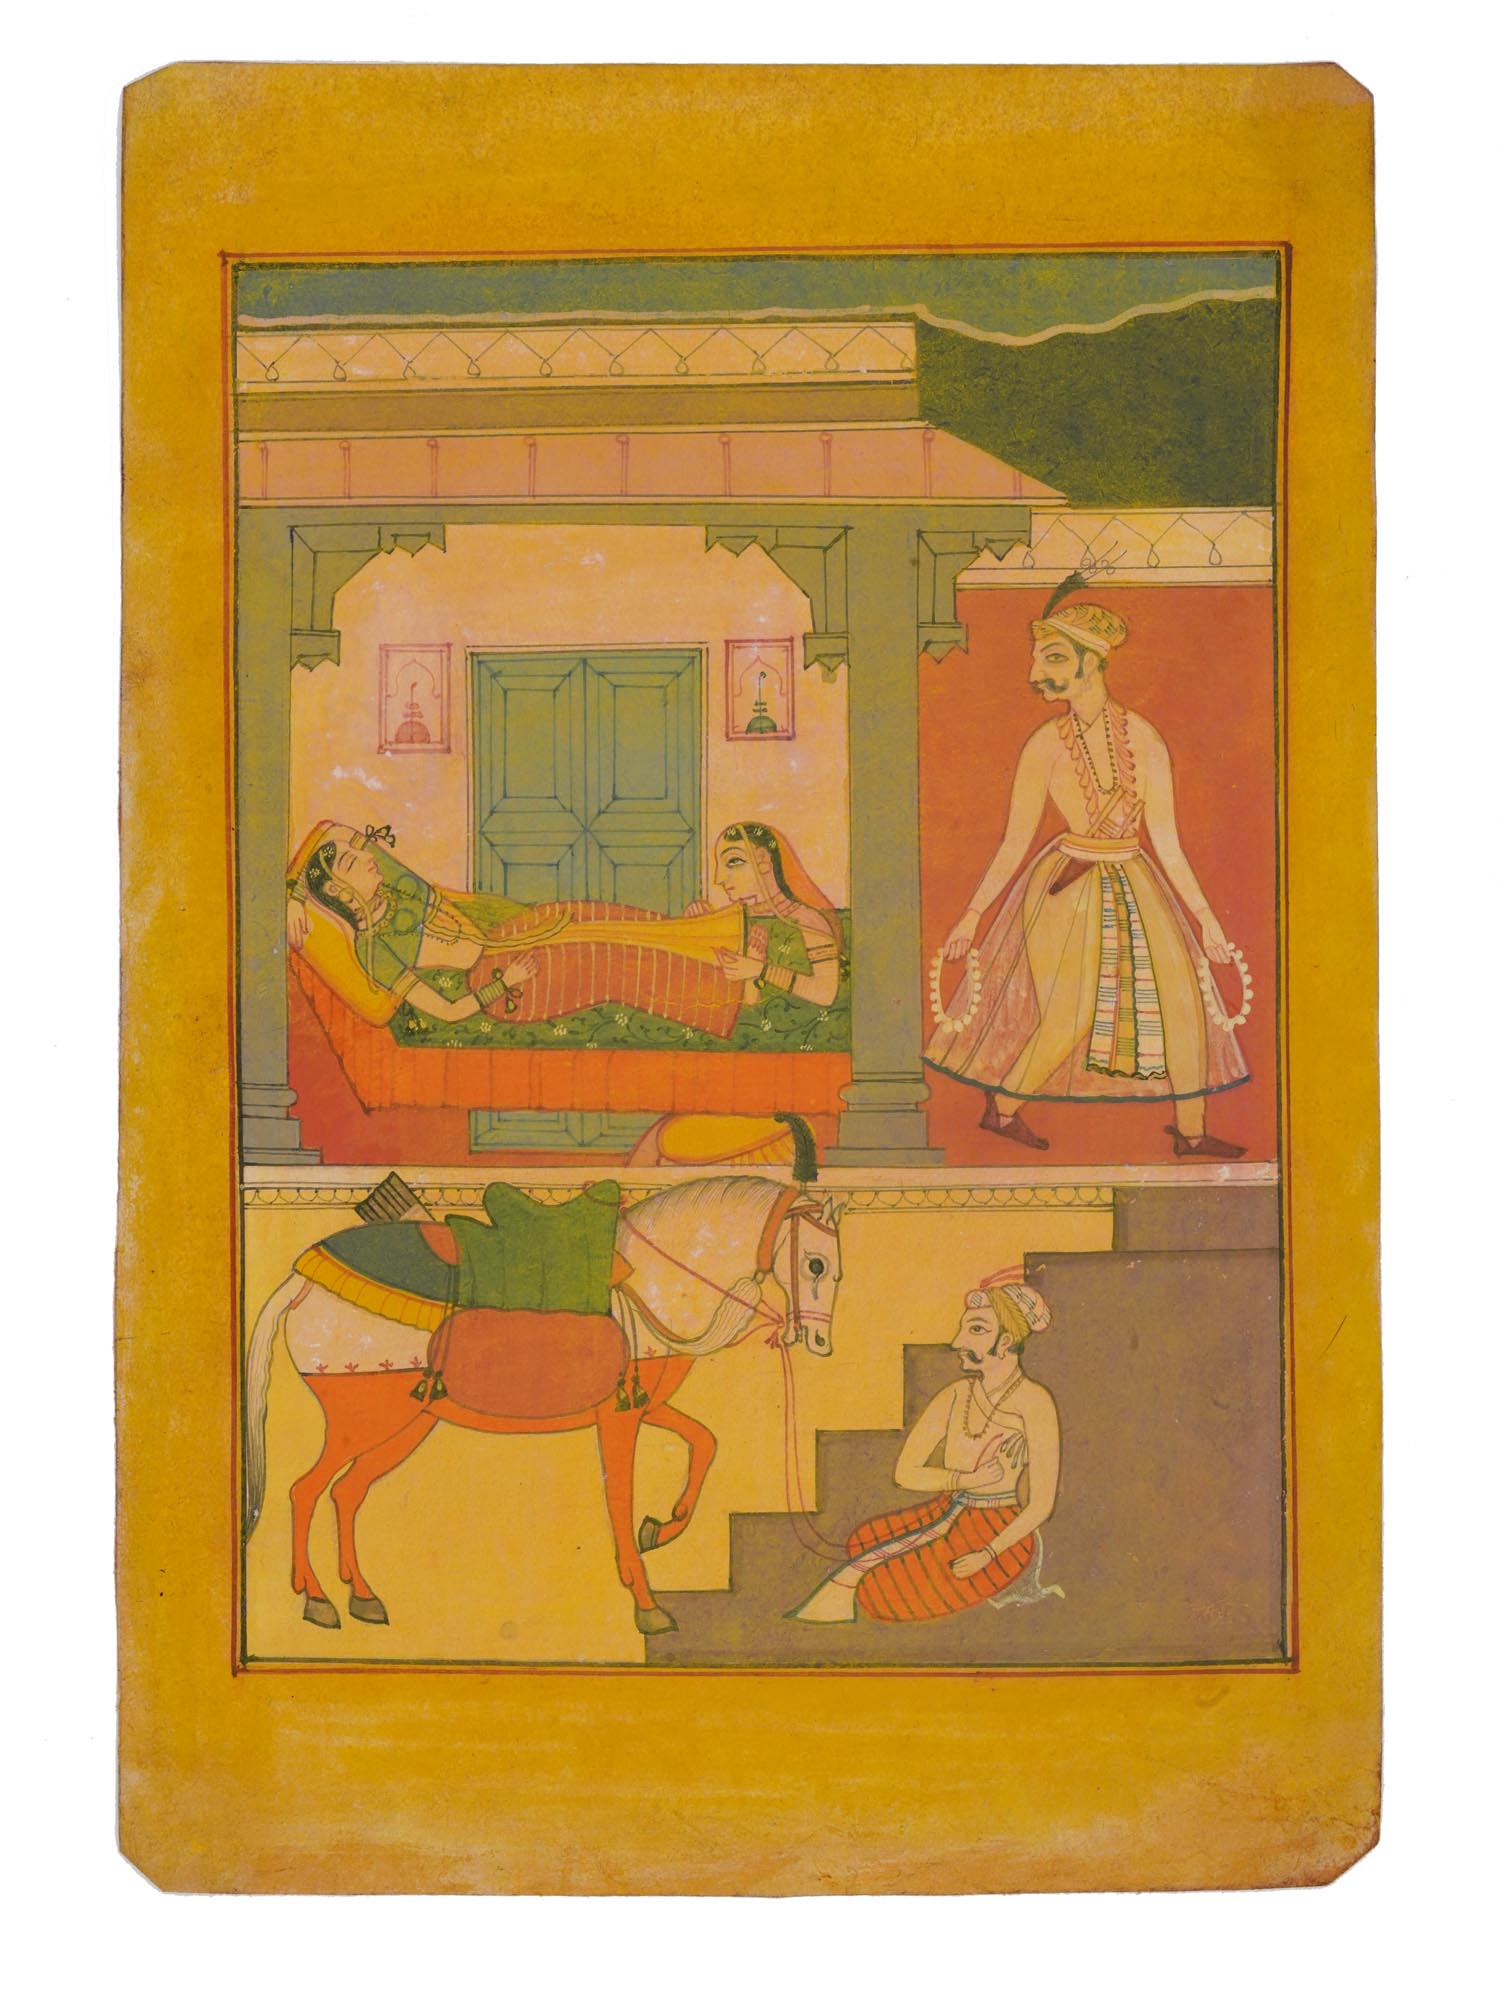 ANTIQUE INDIAN MUGHAL EMPIRE MINIATURE PAINTINGS PIC-1